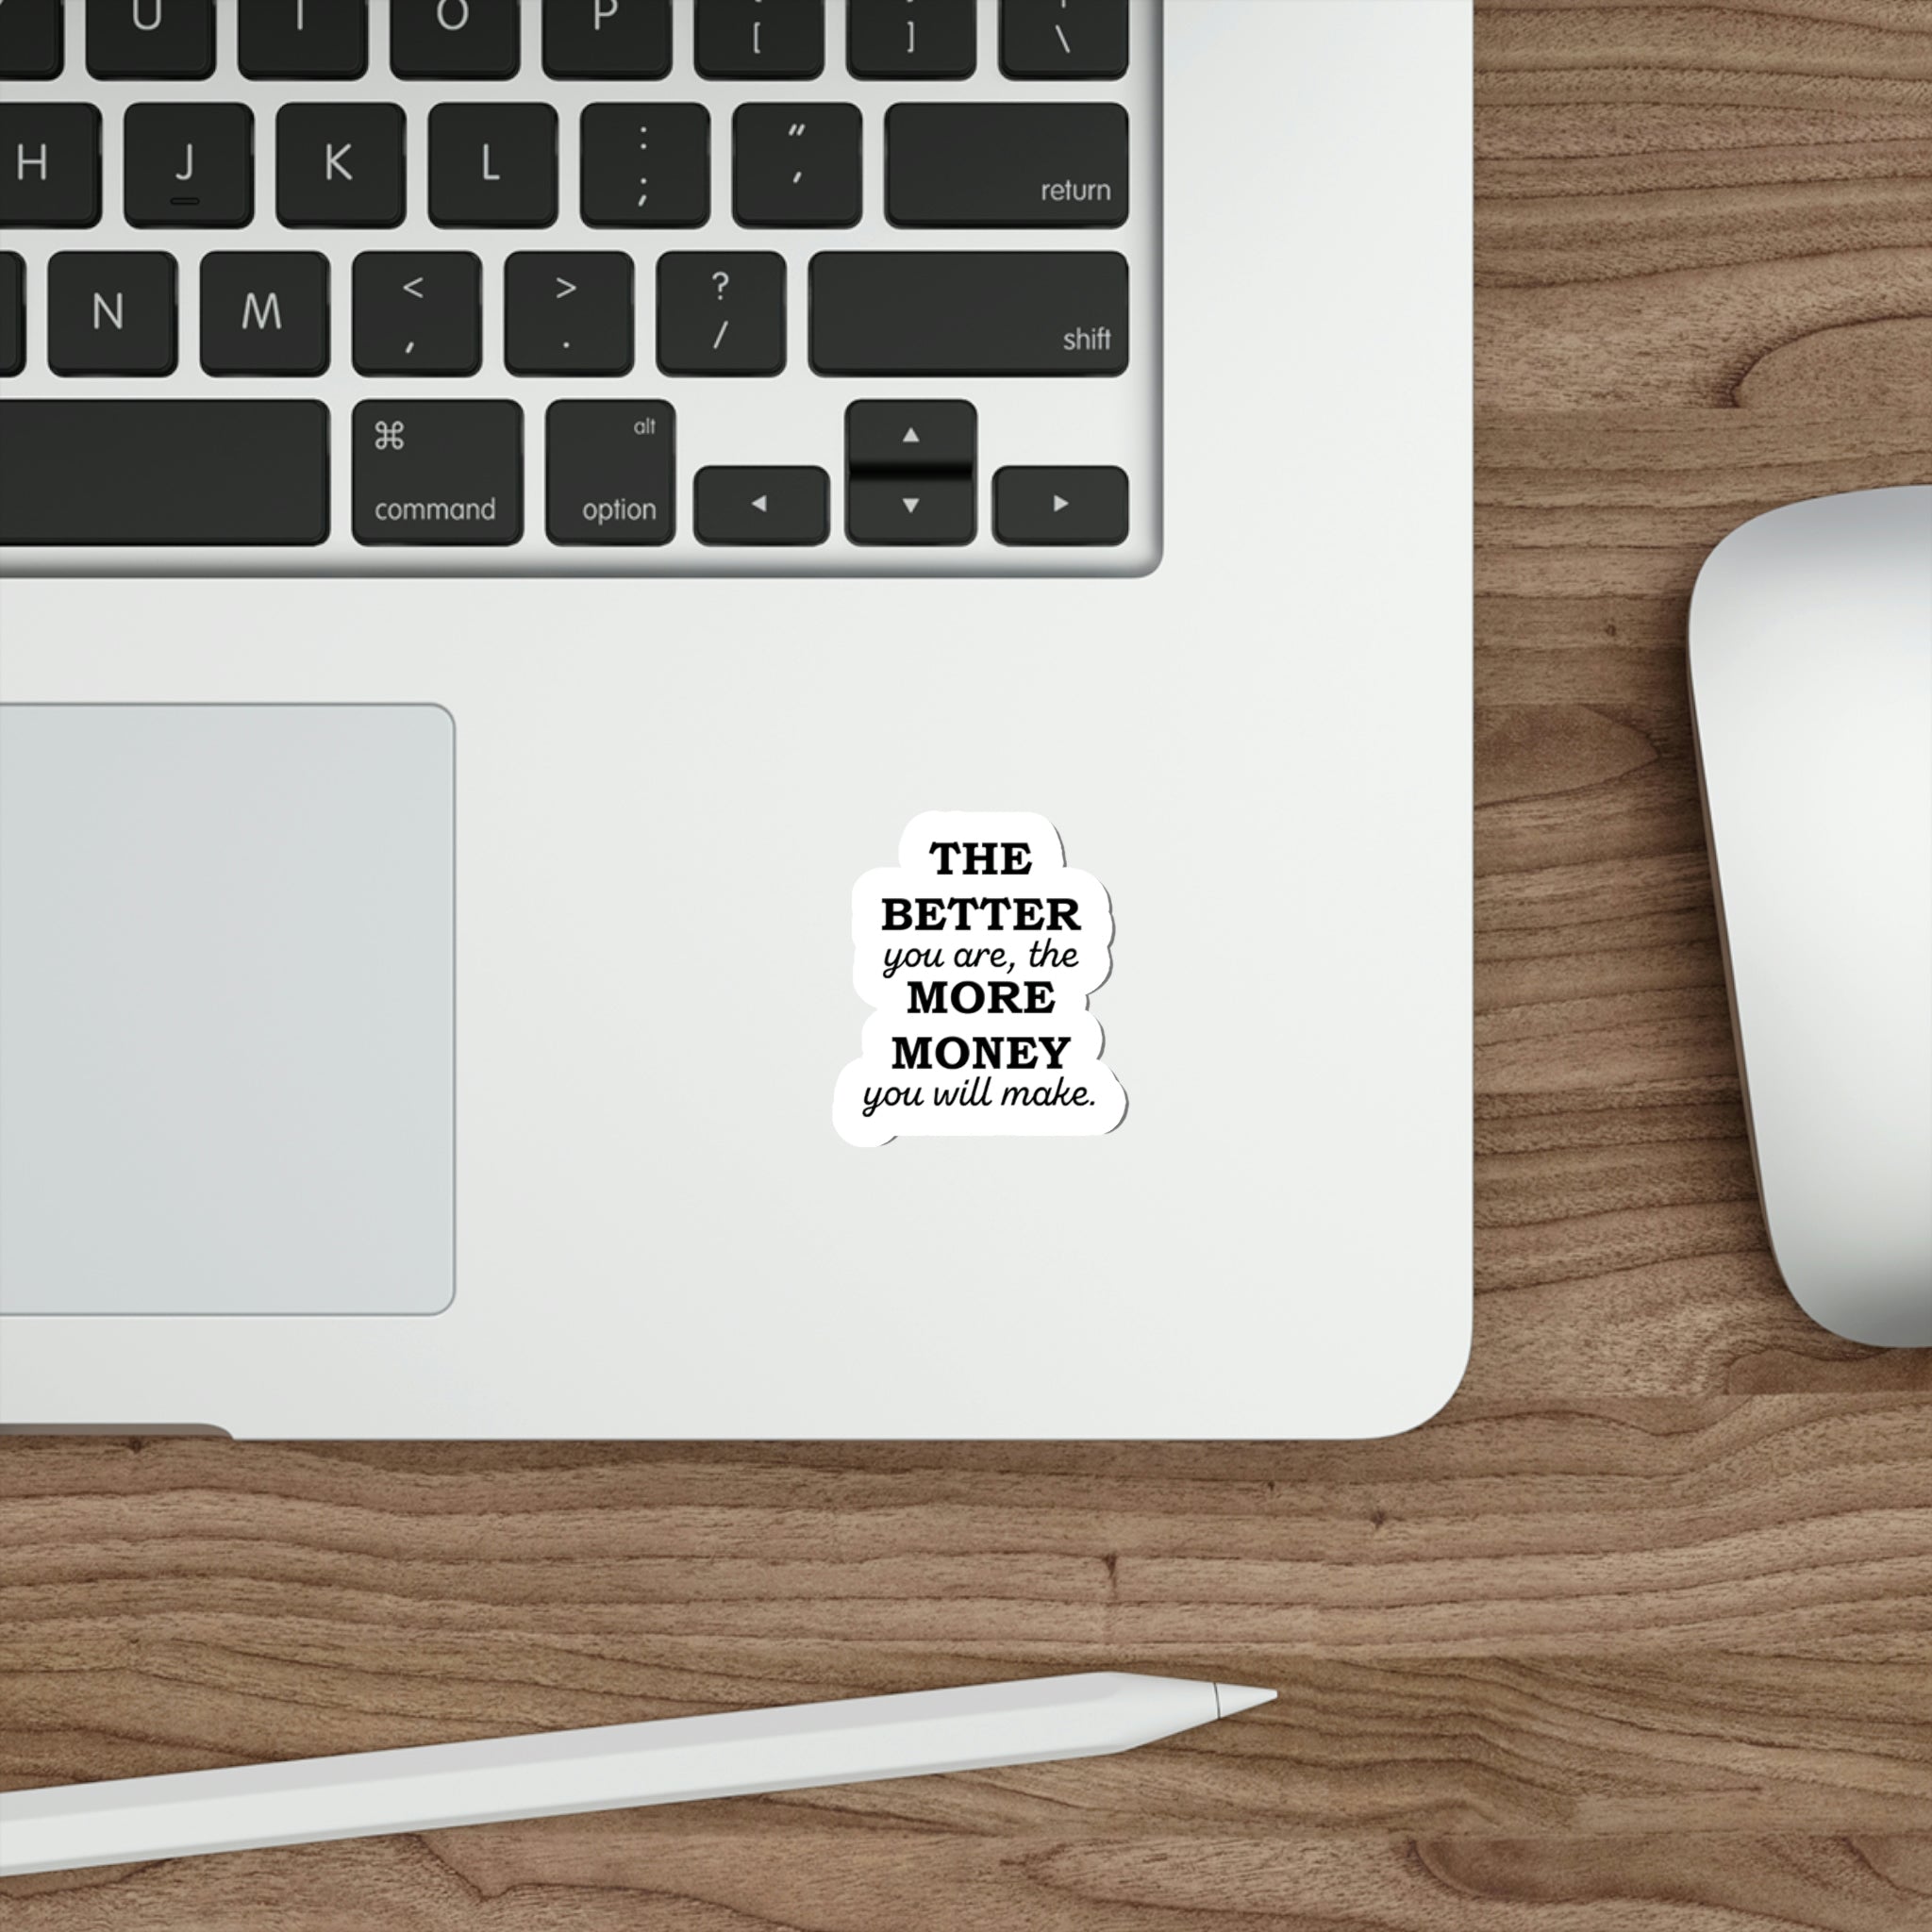 Short motivational quotes for entrepreneurs | Shop stickers #size_2x2-inches